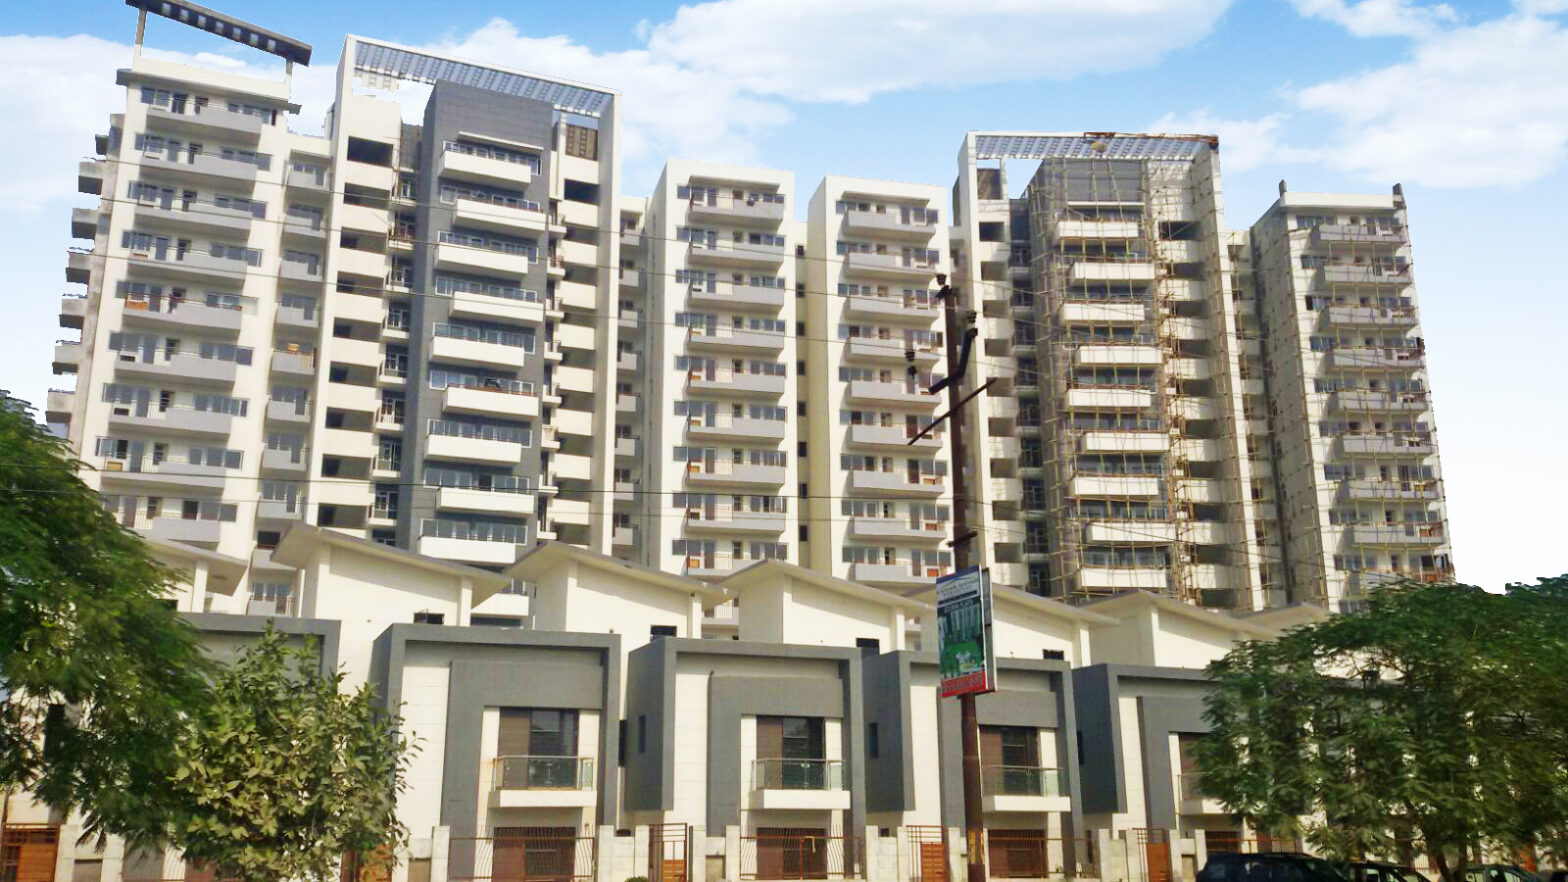 Divinity Homes, Kanpur